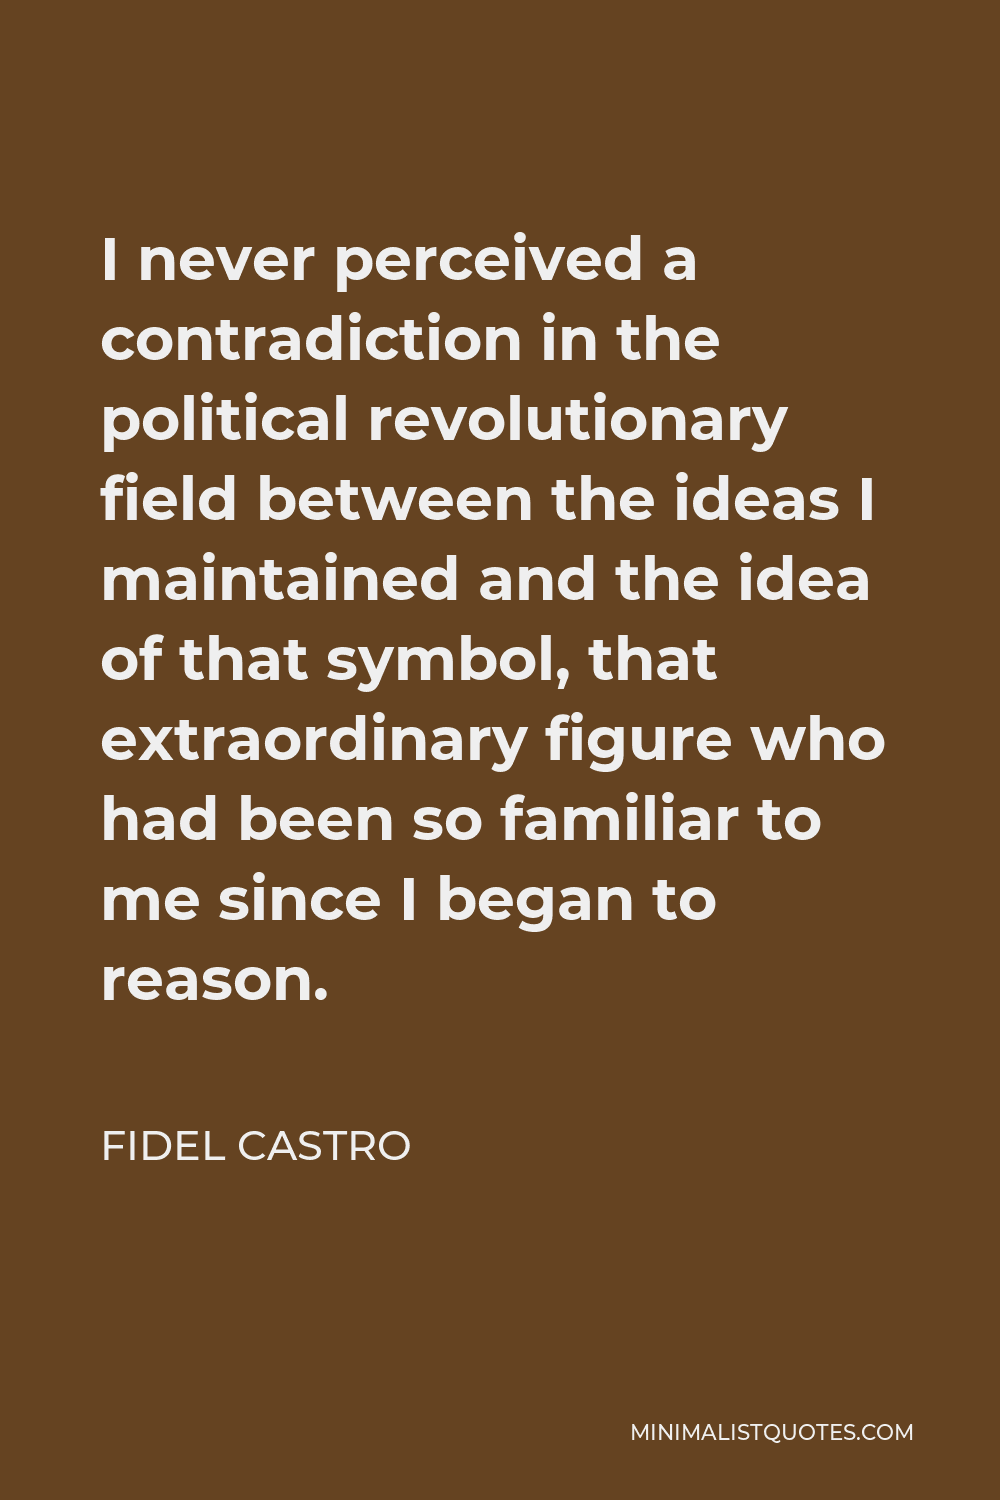 Fidel Castro Quote - I never perceived a contradiction in the political revolutionary field between the ideas I maintained and the idea of that symbol, that extraordinary figure who had been so familiar to me since I began to reason.